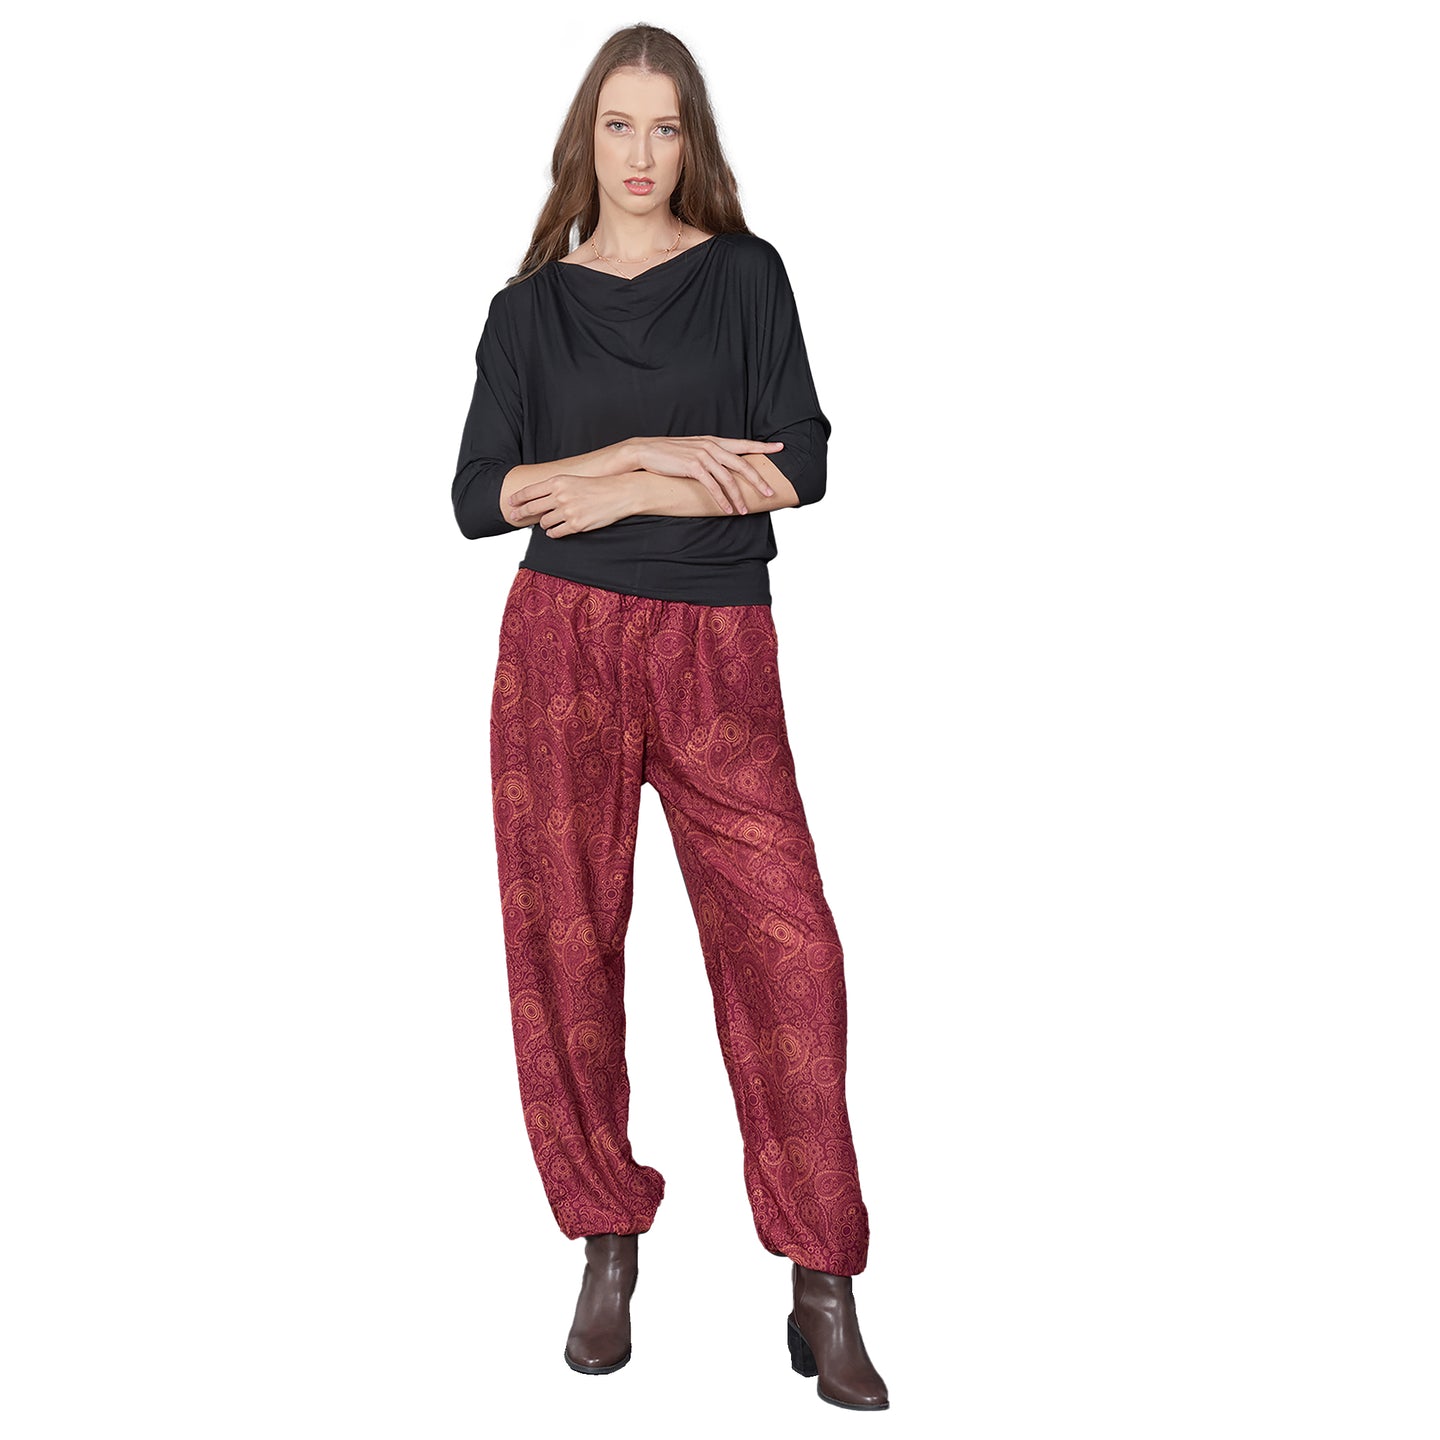 Paisley Mistery Unisex Drawstring Genie Pants in Red PP0110 020016 06